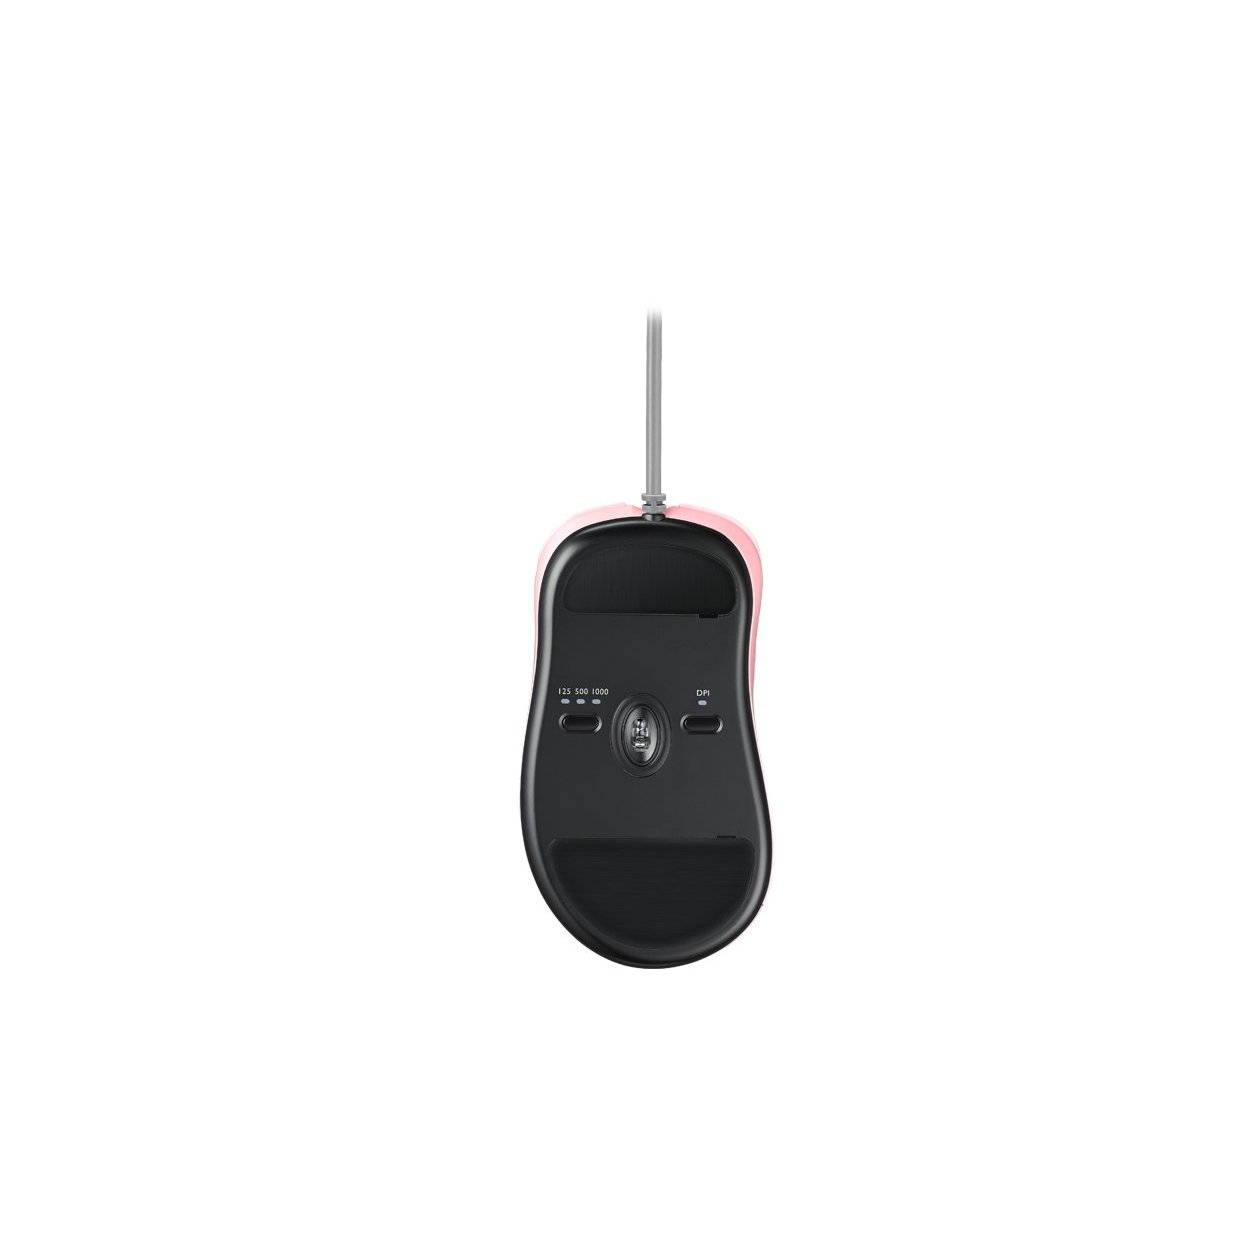 ZOWIE EC2-B DIVINA PINK Mouse for e-Sports-Addice Inc